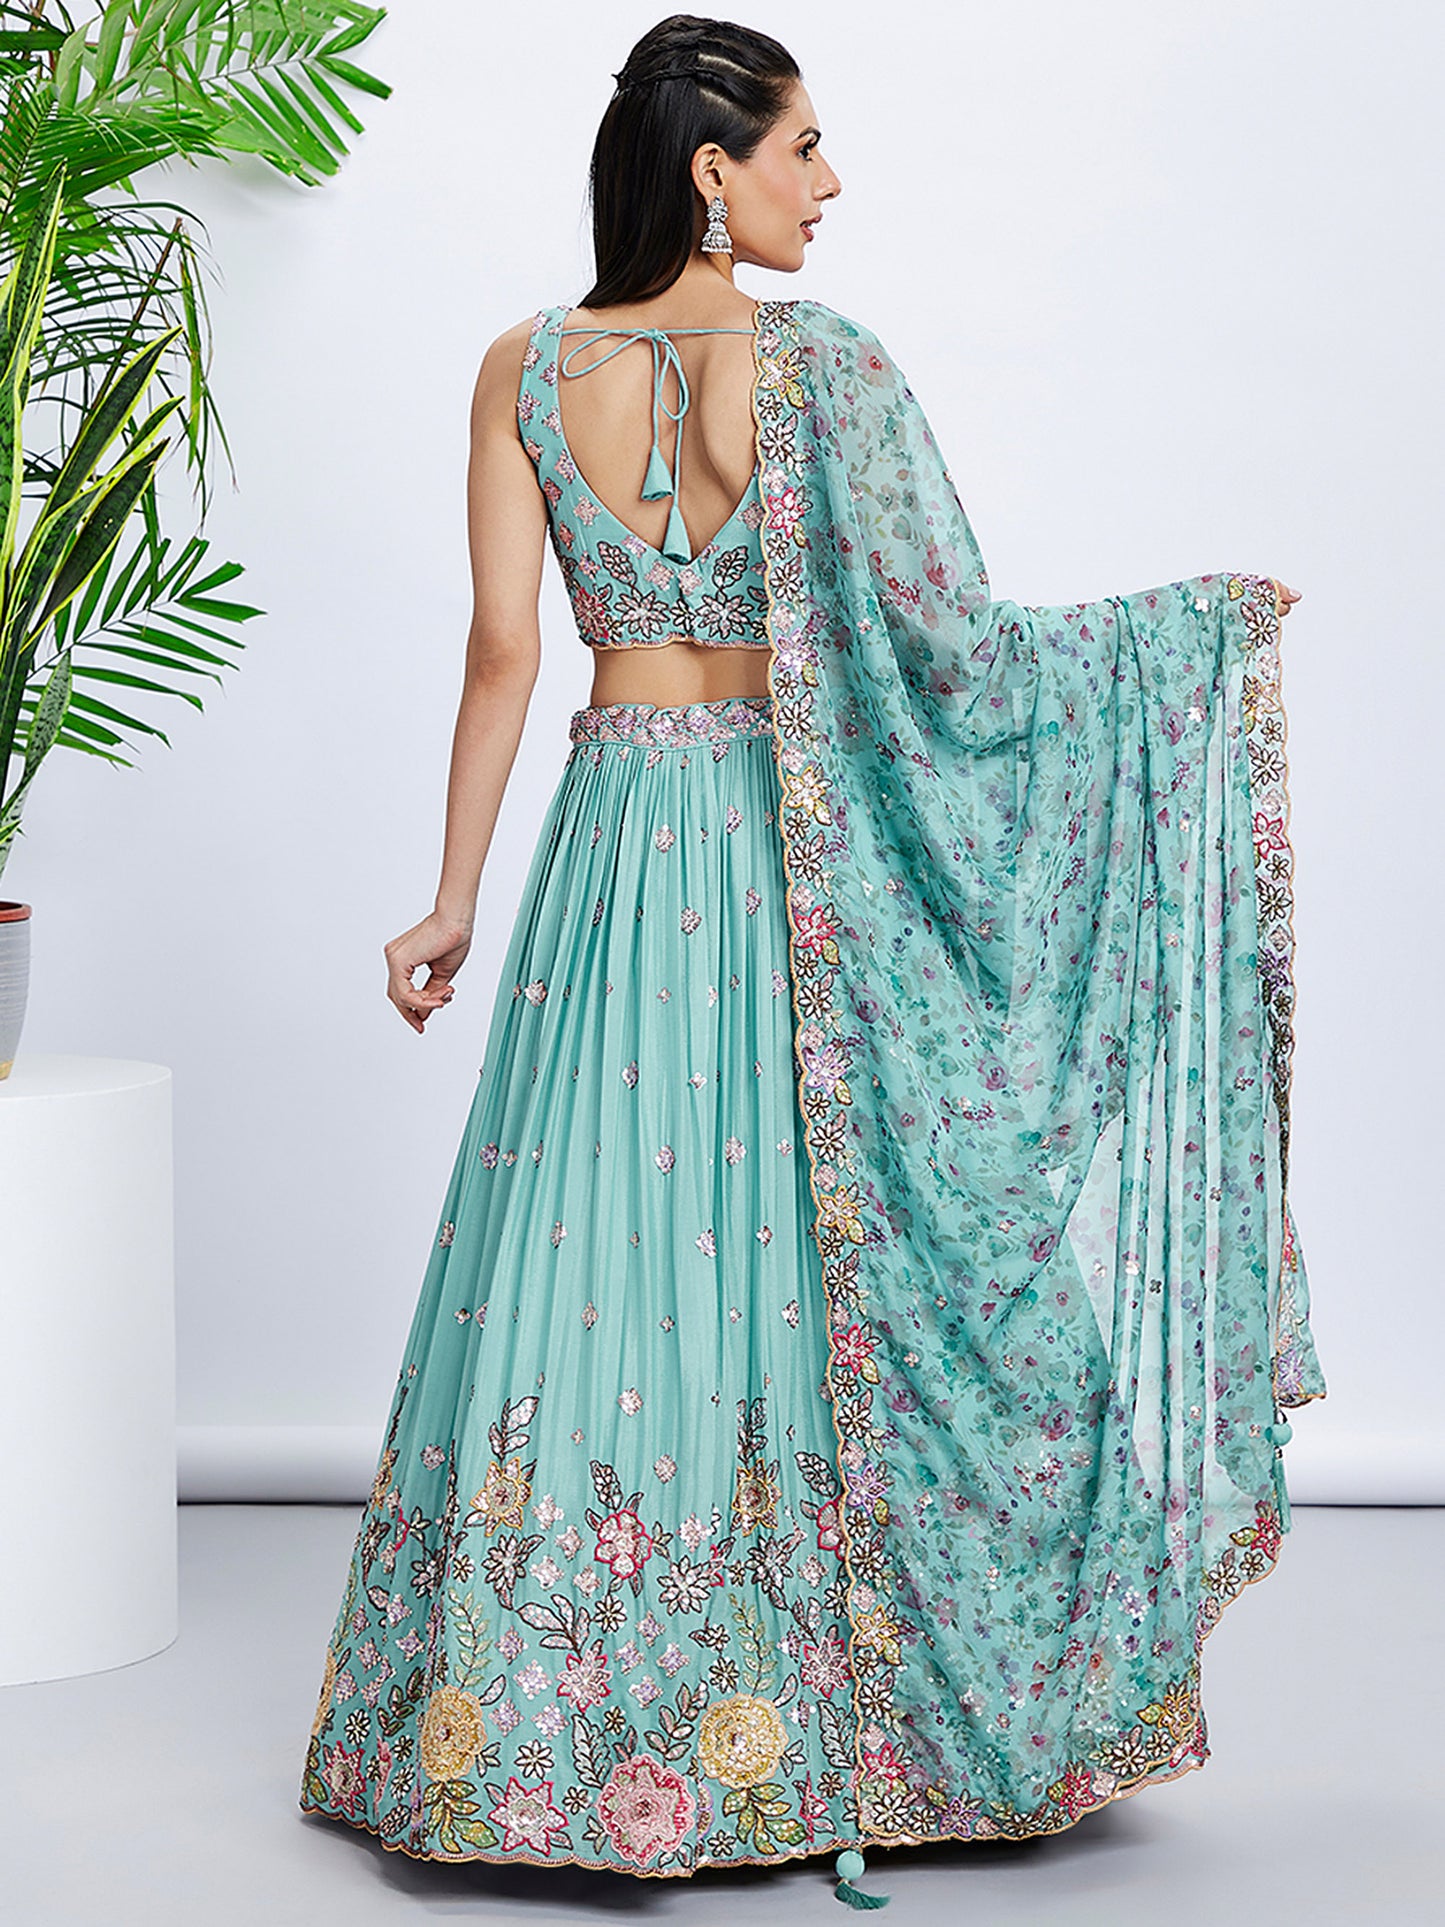 Turquoise blue Chiffon Sequins and thread embroidery Lehenga